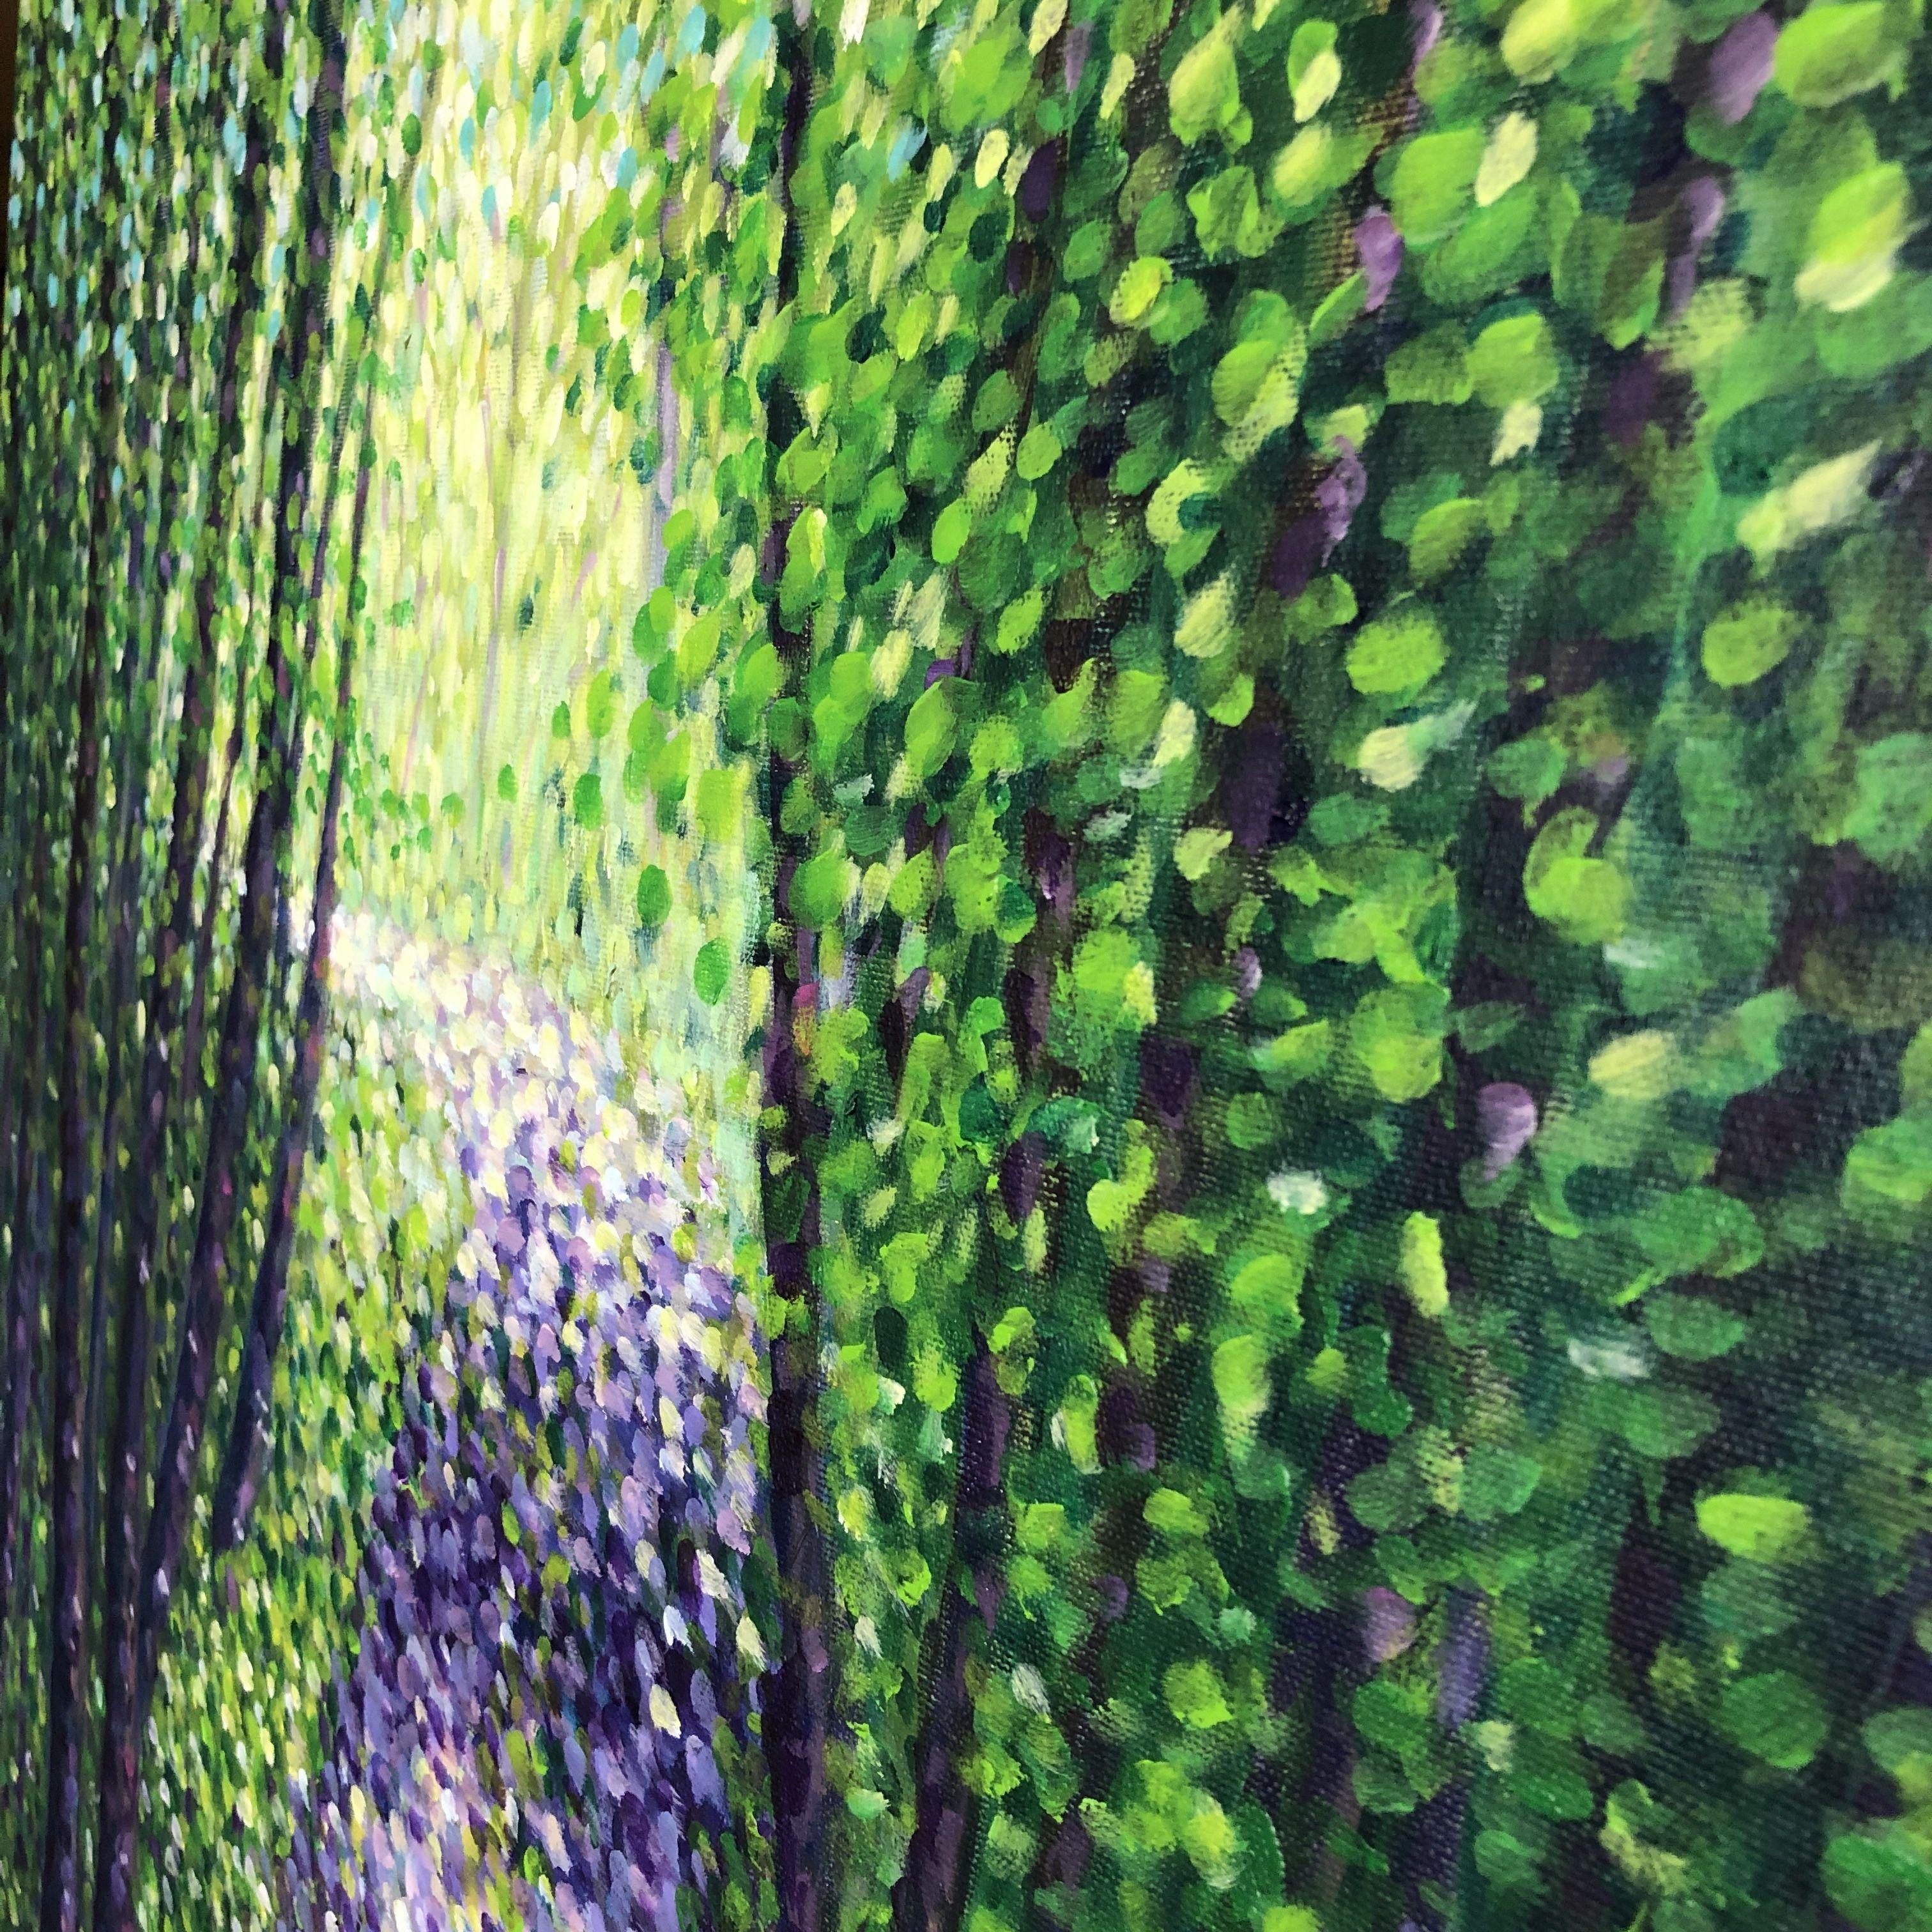 Path in the Green Forest    The inspiration for this original painting came from a trek made by the artist this Summer somewhere in Quebec, Canada. These trees, the sunlight filtered through the foliage, the shade from the trees on the path...